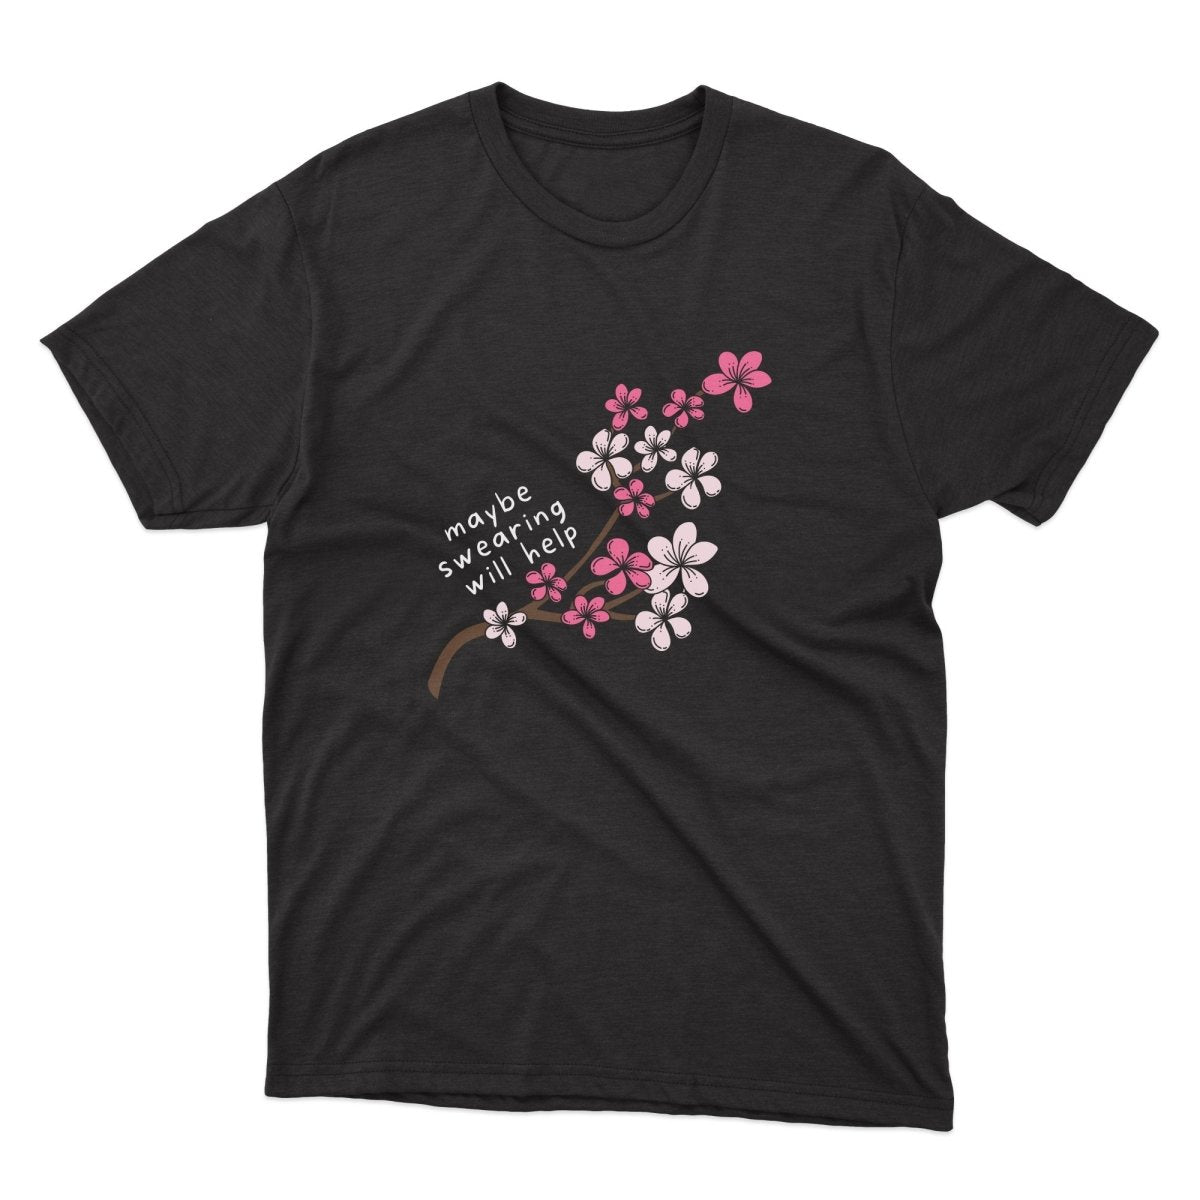 Maybe Swearing Will Help Shirt - stickerbullMaybe Swearing Will Help ShirtShirtsPrintifystickerbull30285739849720598621BlackSa black t - shirt with pink flowers on it